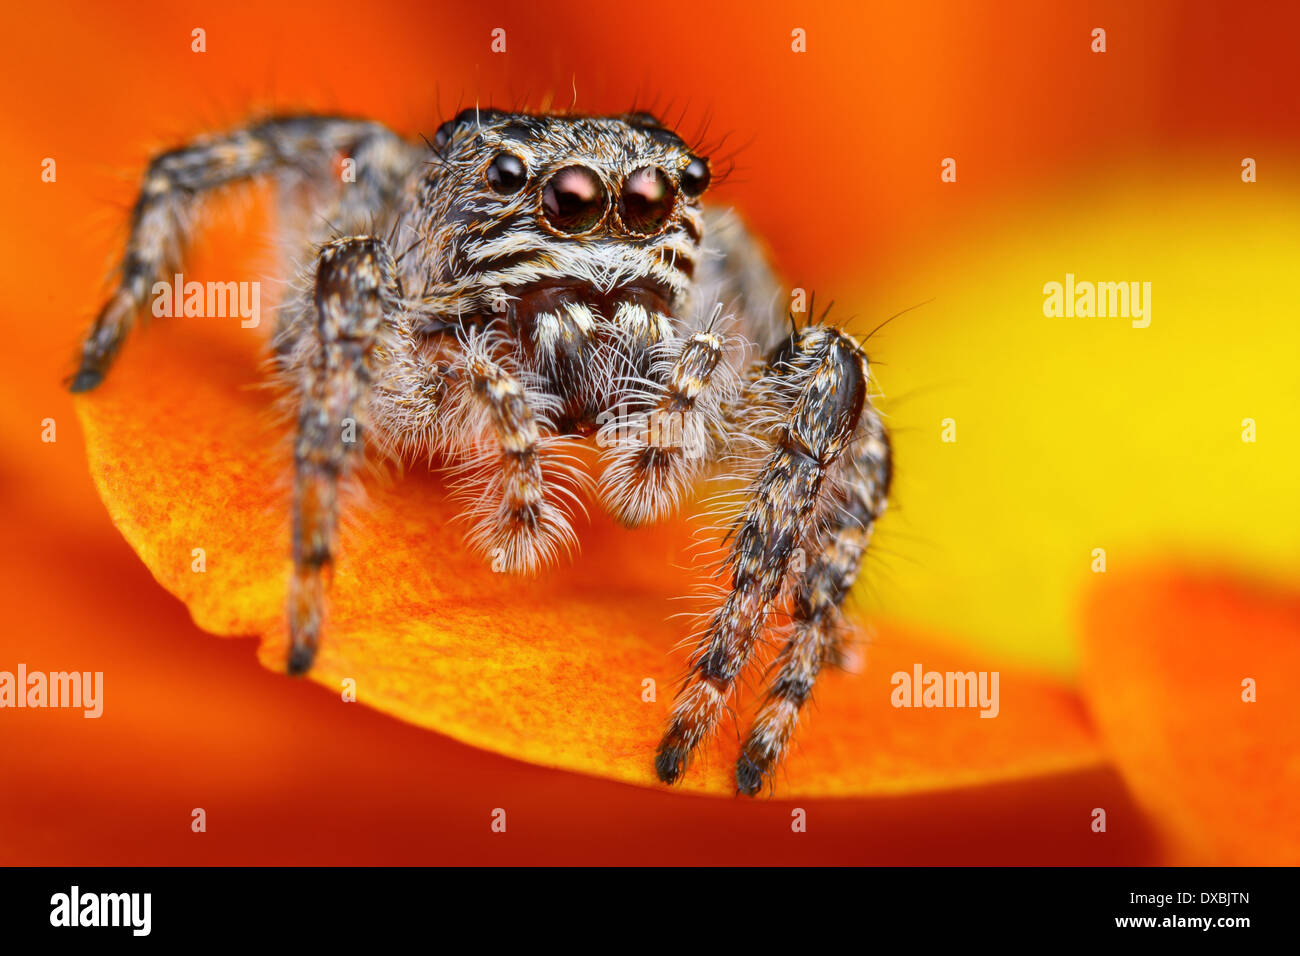 Turkish jumping spider close up with the orange flower background Stock Photo